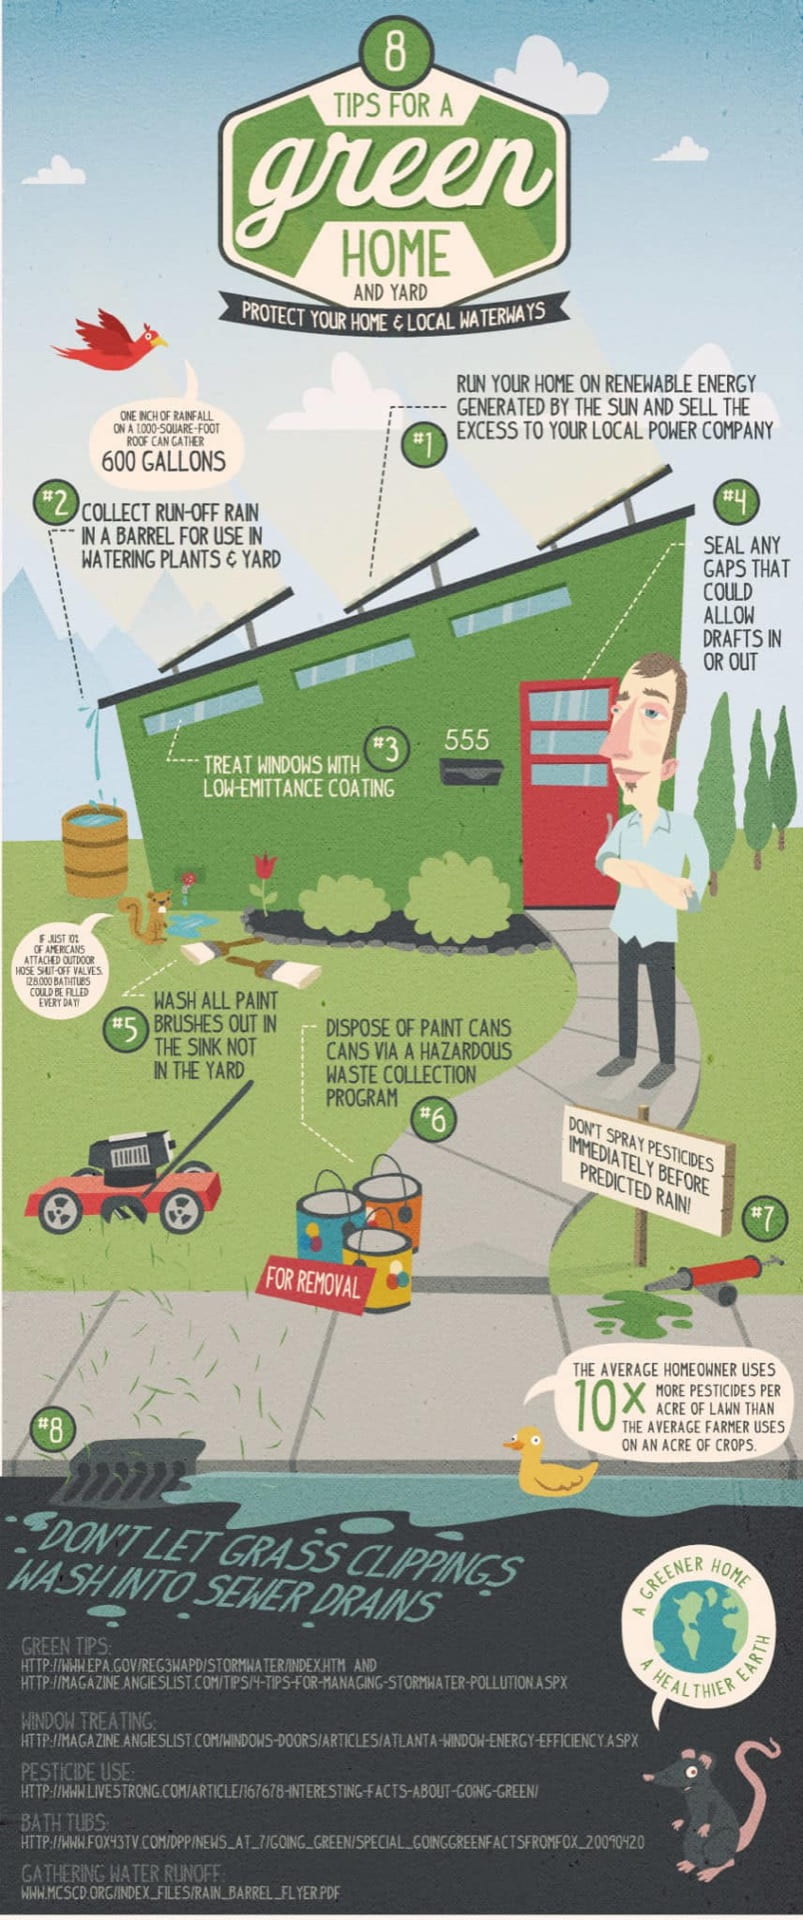 An infographic focused on thing that can be done at the residential level to incorporate green living